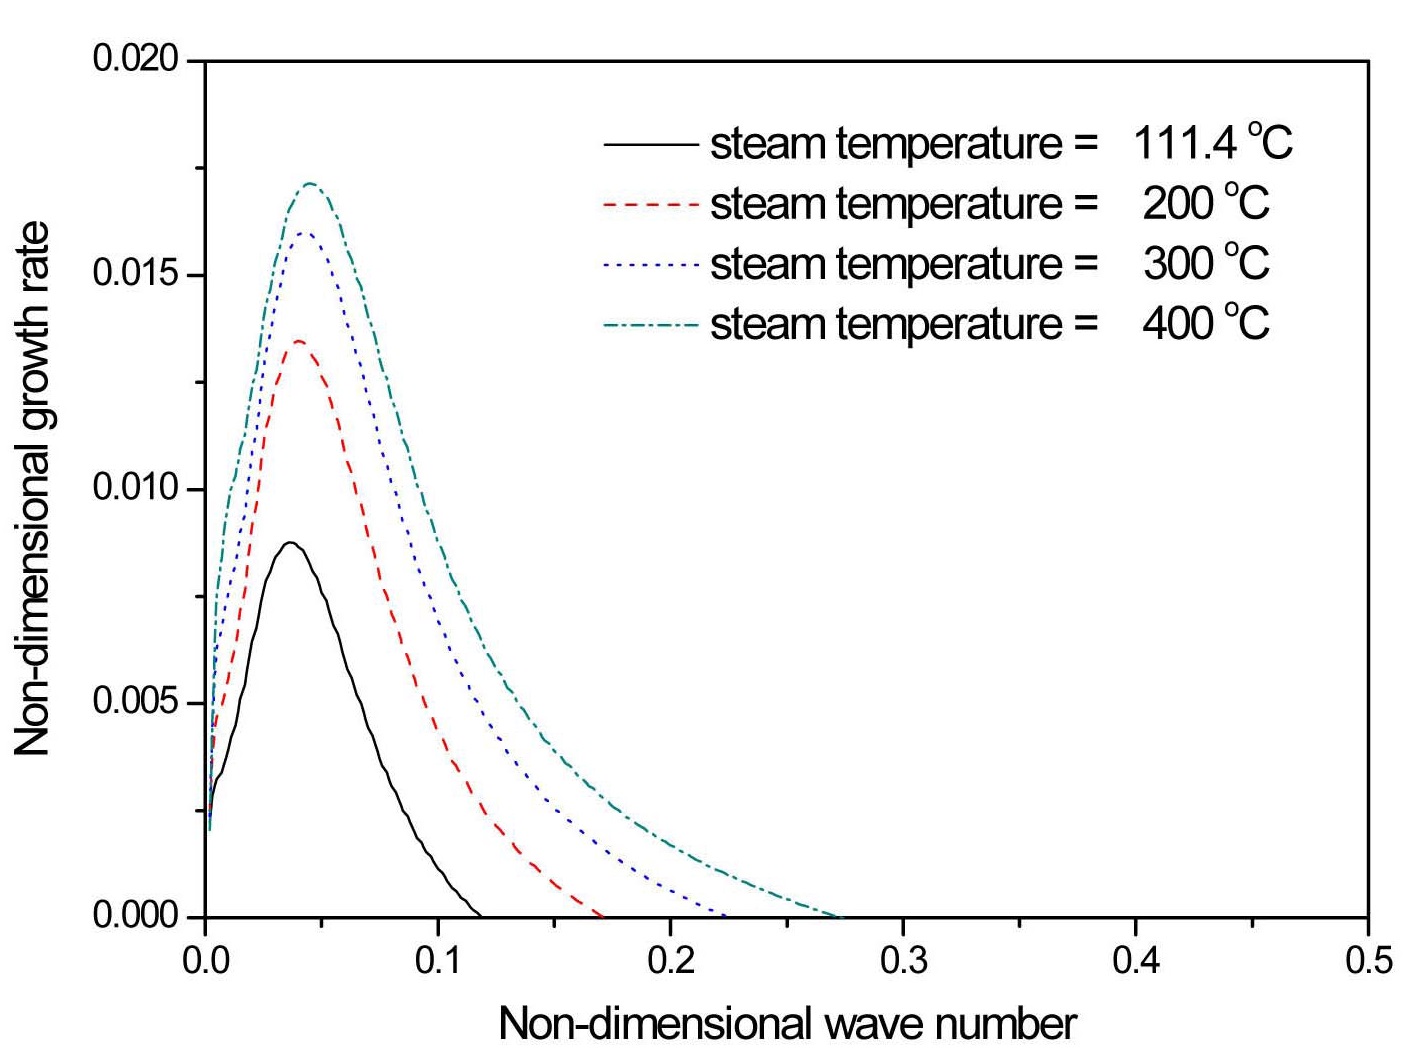 Non-dimensionless Temporal Growth rate as a
Function of Non-dimensional Wavenumber for P=0.15 MPa,
？1=1m/sec, U2,M=10m/sec, H=0.05mm, δ=0.5mm, and Different Steam Temperature